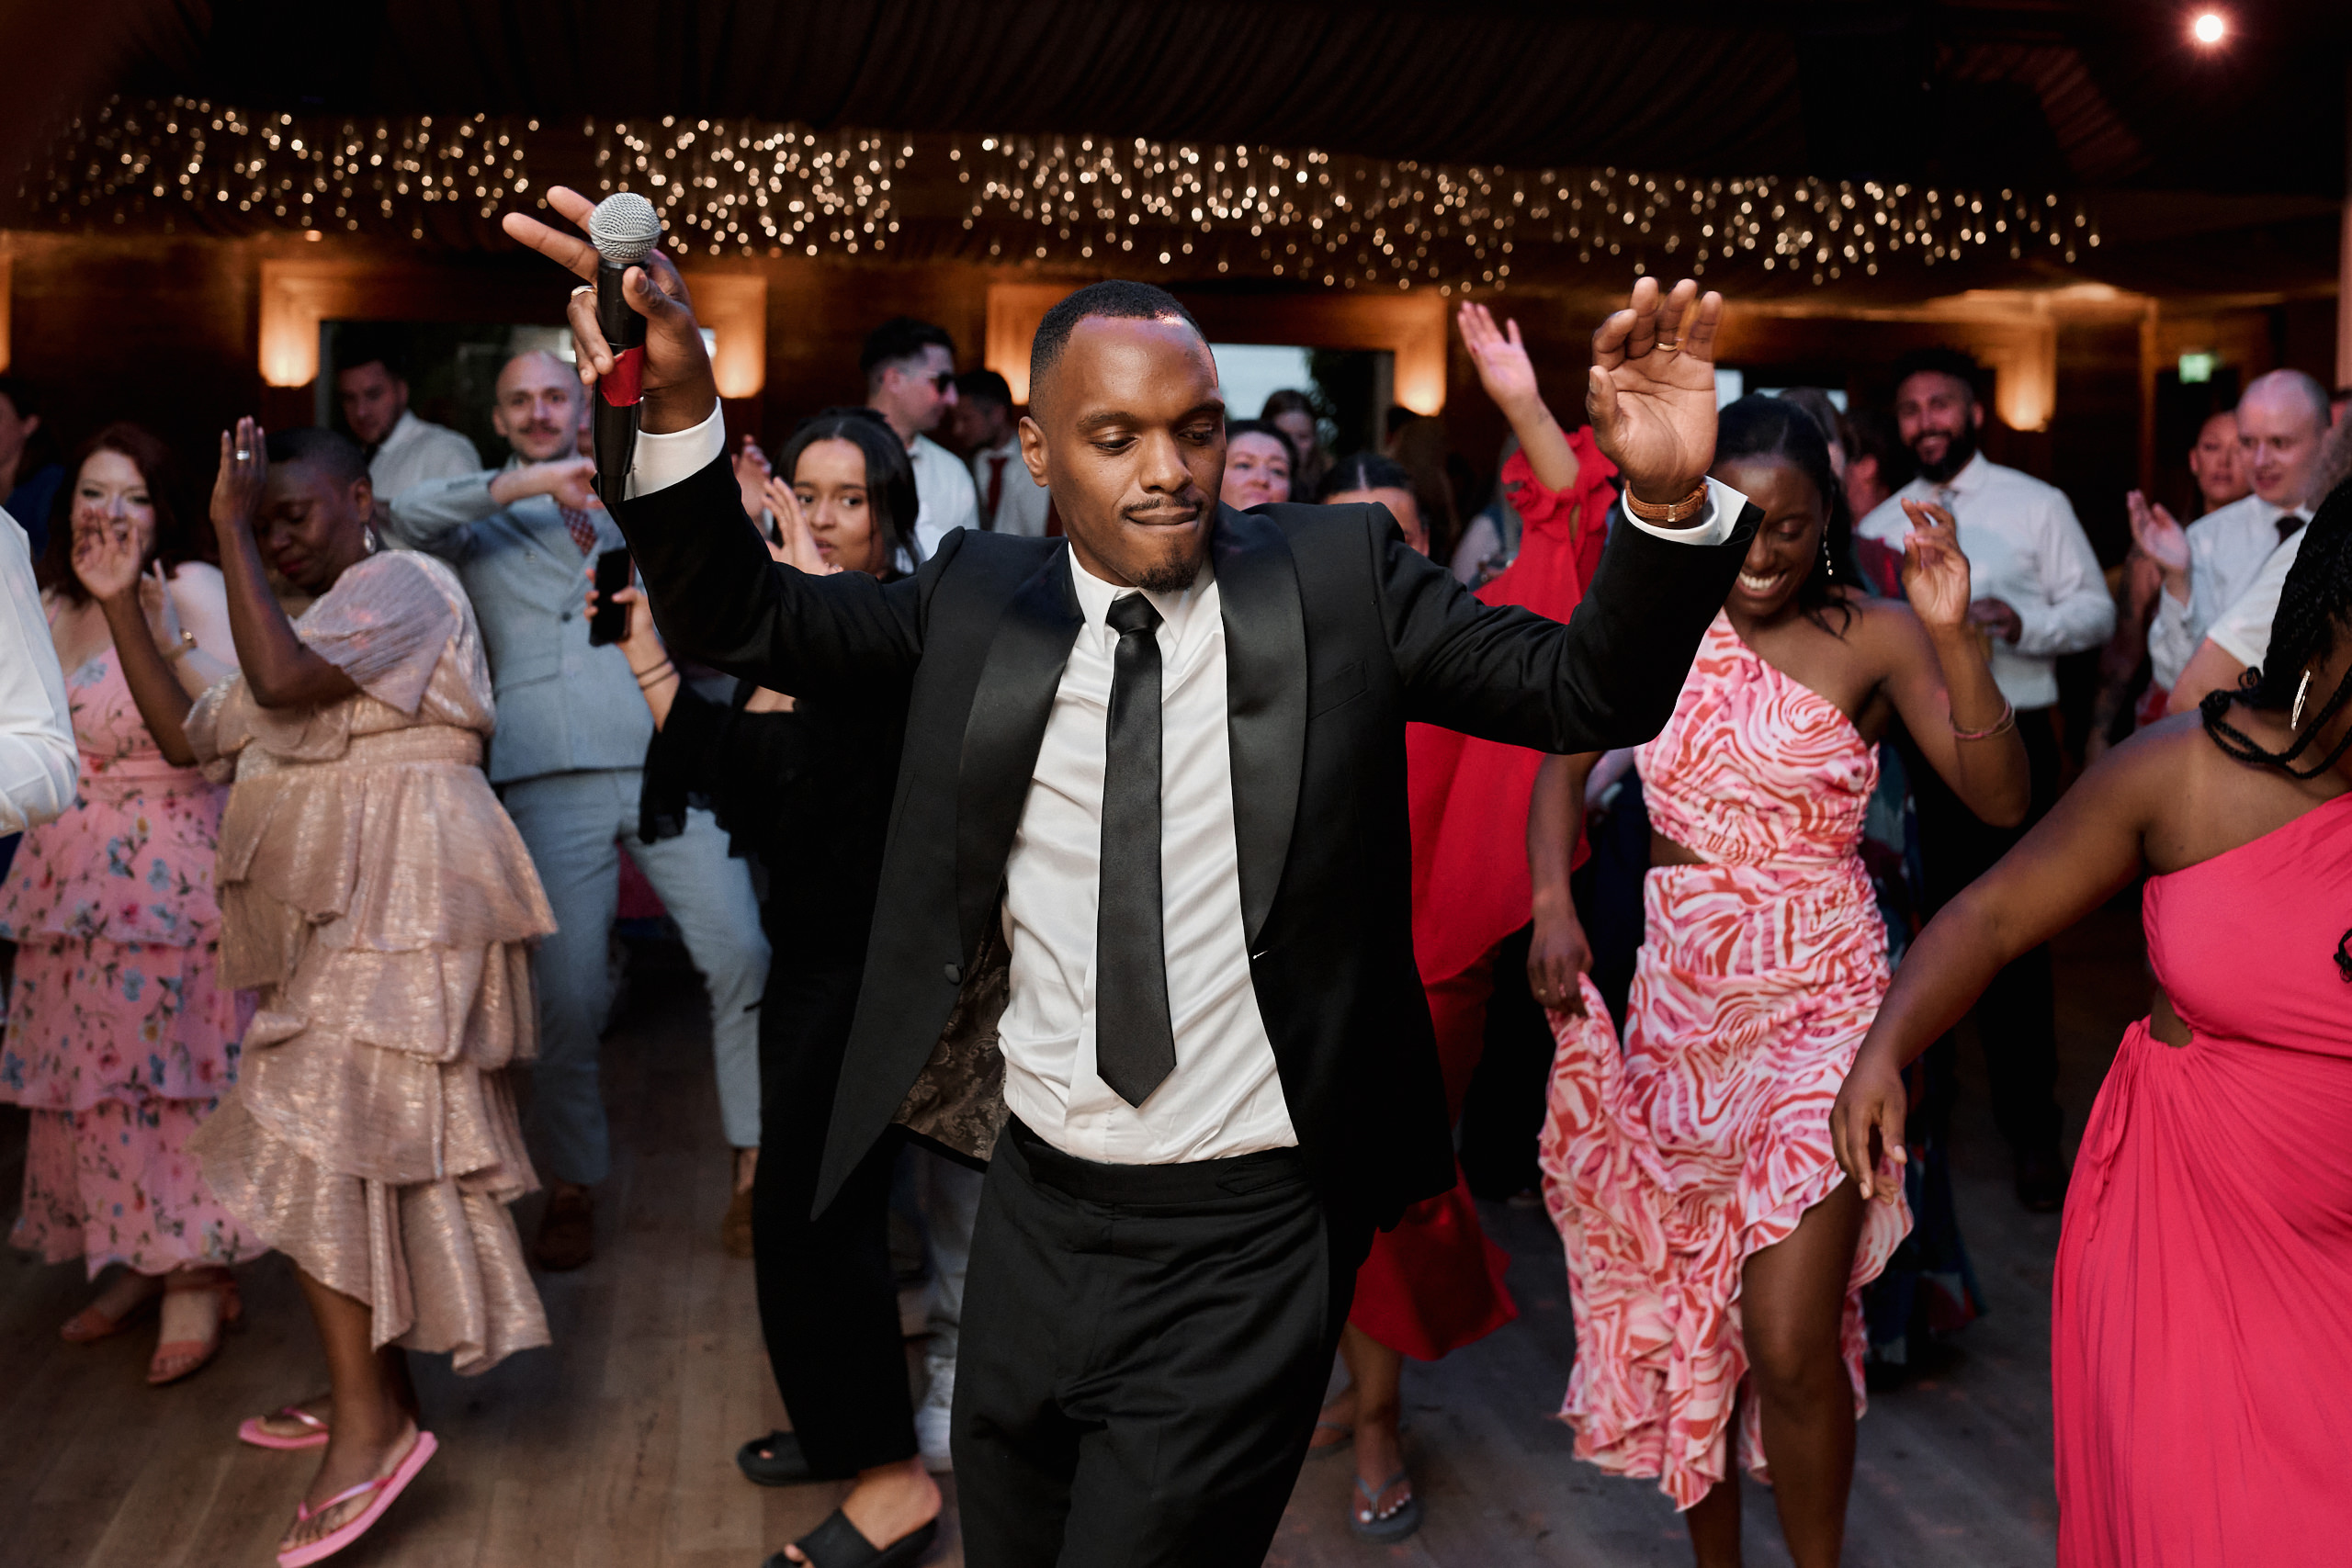 A guy in a suit busting a move at a wedding party.